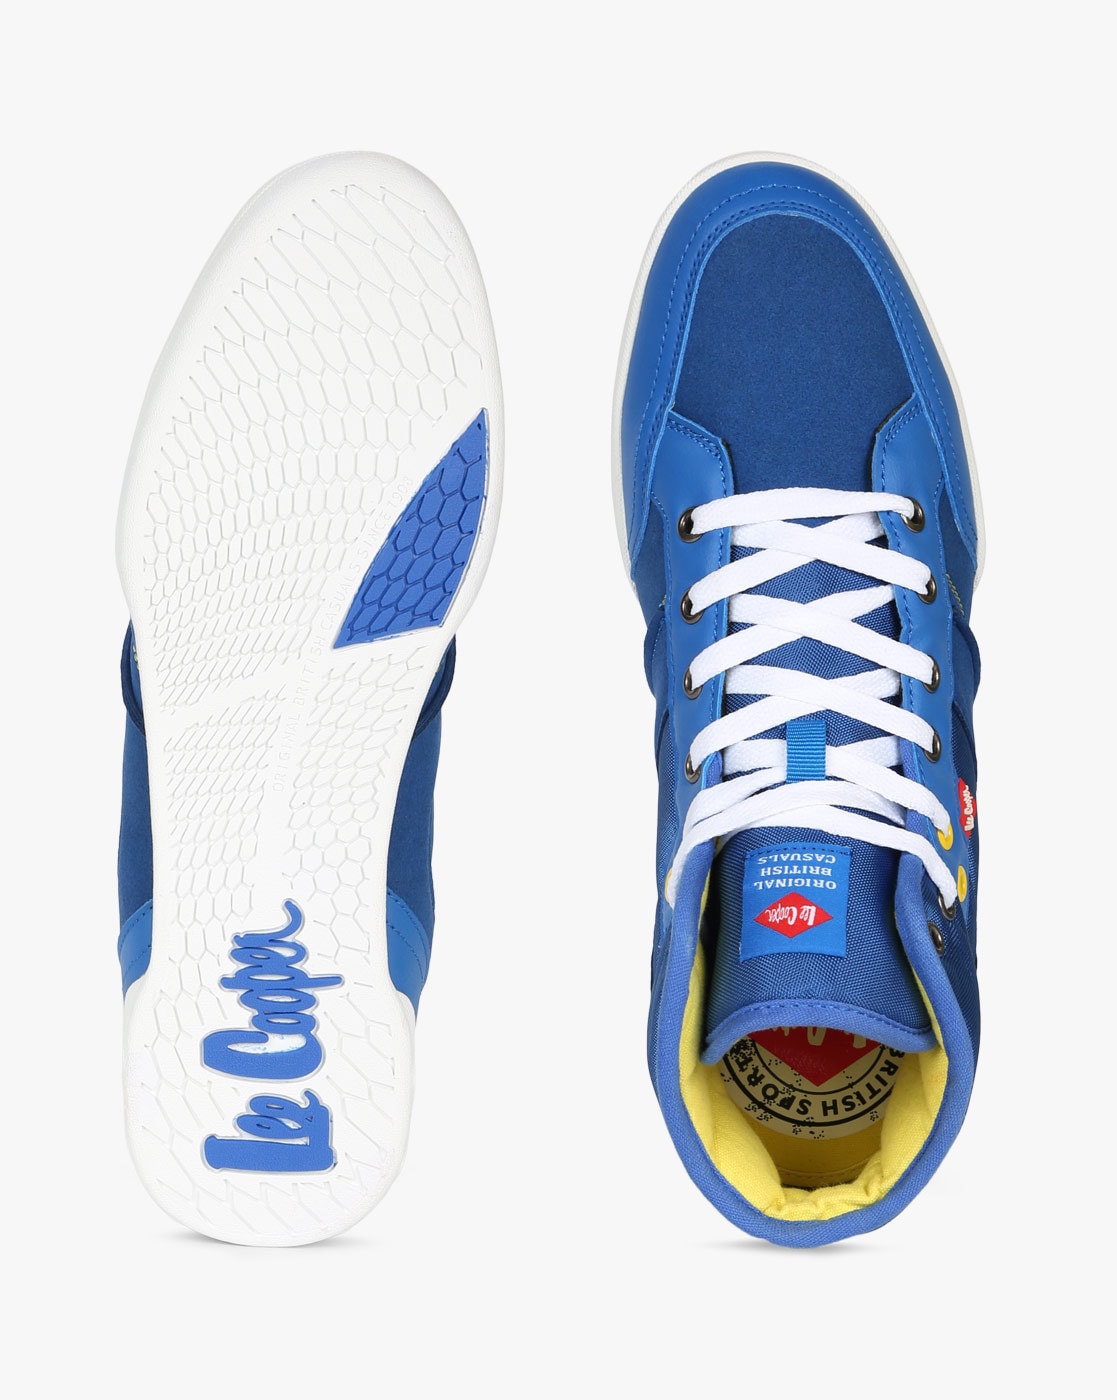 Lee Cooper Men's Blue & Yellow Running Shoes at Best Prices - Shopclues  Online Shopping Store